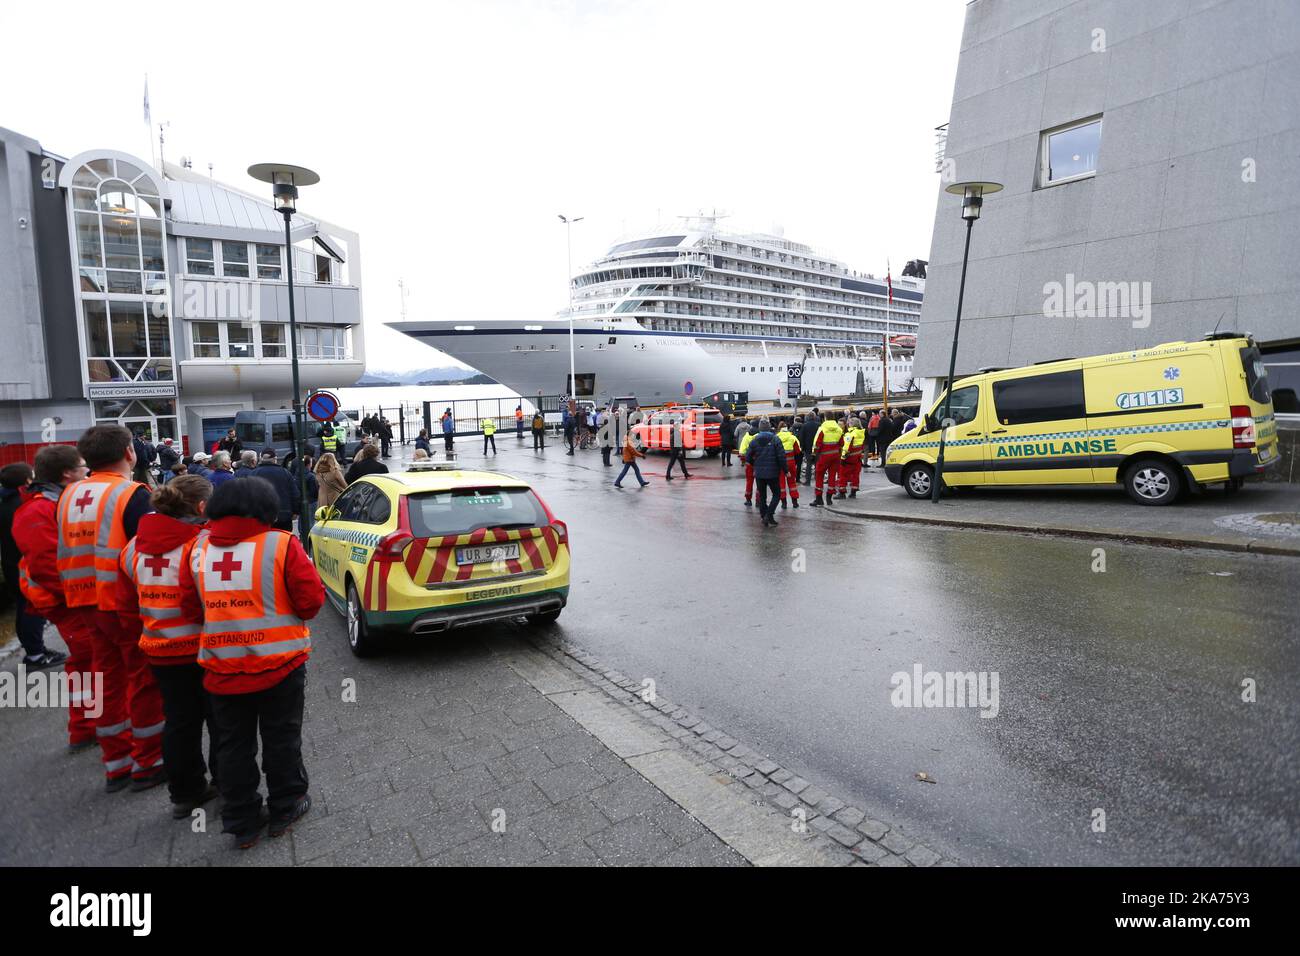 Molde 20190324. Cruise ship Viking Sky arrives at Molde after the problems the ship got yesterday in the storm, utside of Hustadvika in Norway yesterday. Photo: Svein Ove Ekornesvåg / NTB scanpix  Stock Photo